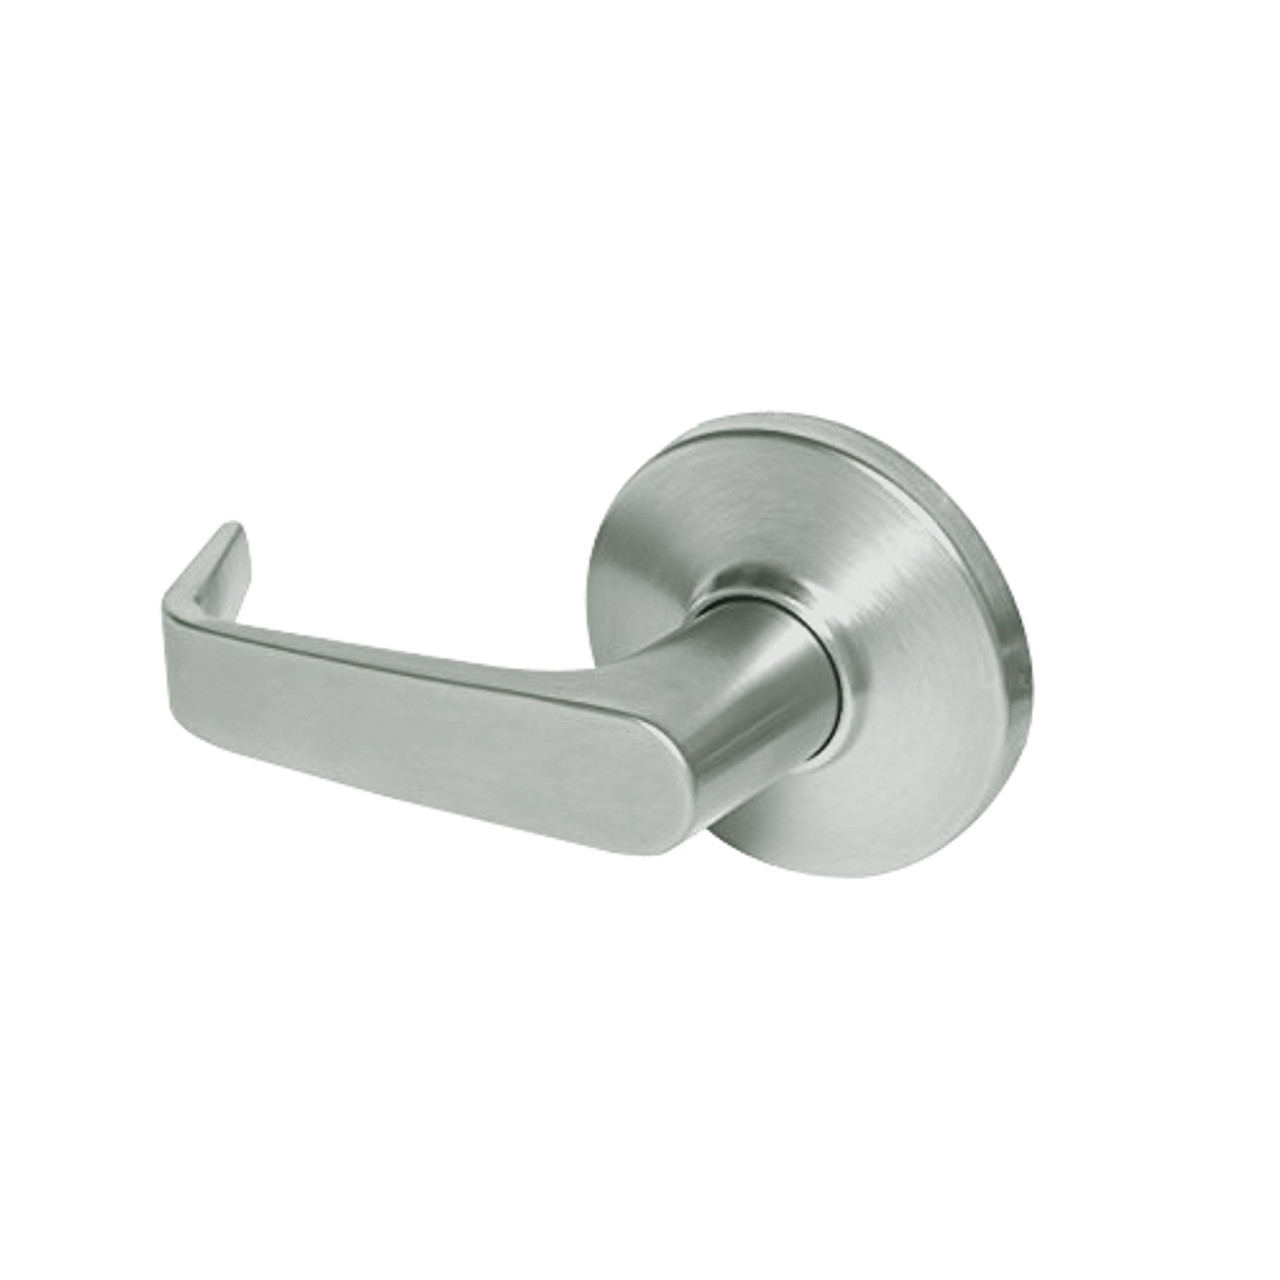 9K30Y15DS3618 Best 9K Series Exit Heavy Duty Cylindrical Lever Locks with Contour Angle with Return Lever Design in Bright Nickel